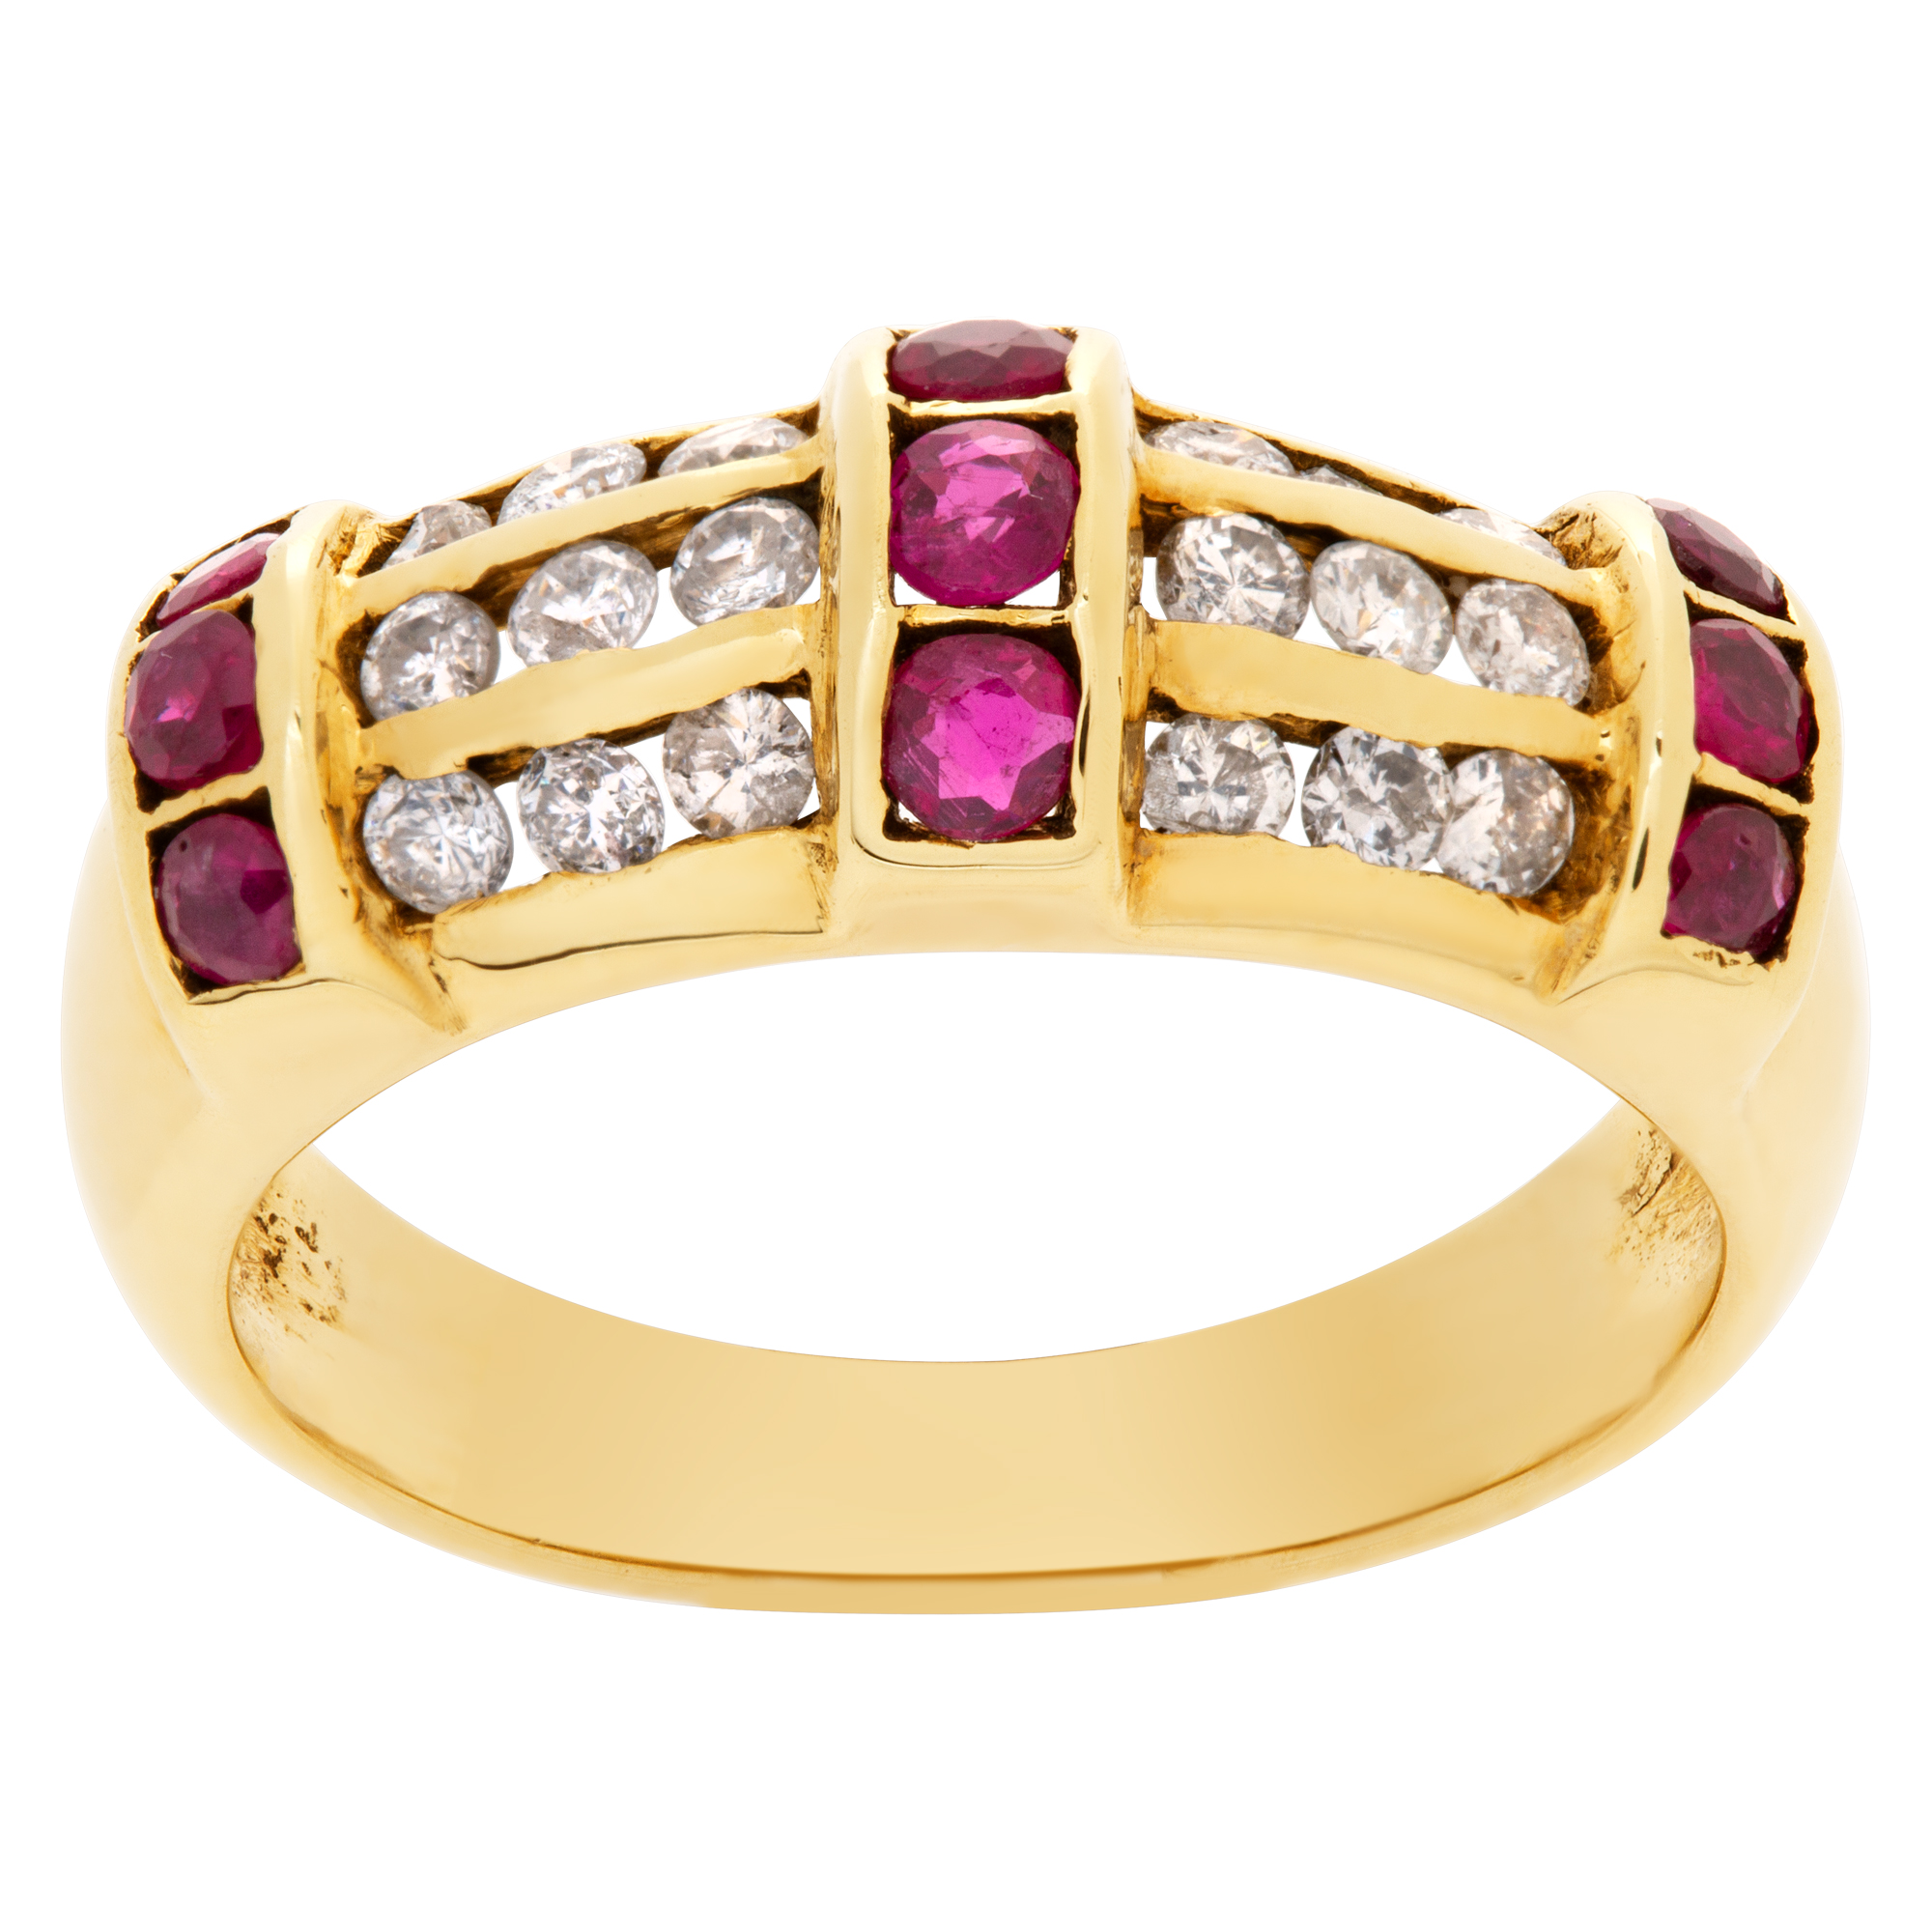 Lovely ruby and diamonds ring in 14k yellow gold. Size 5.5 image 1